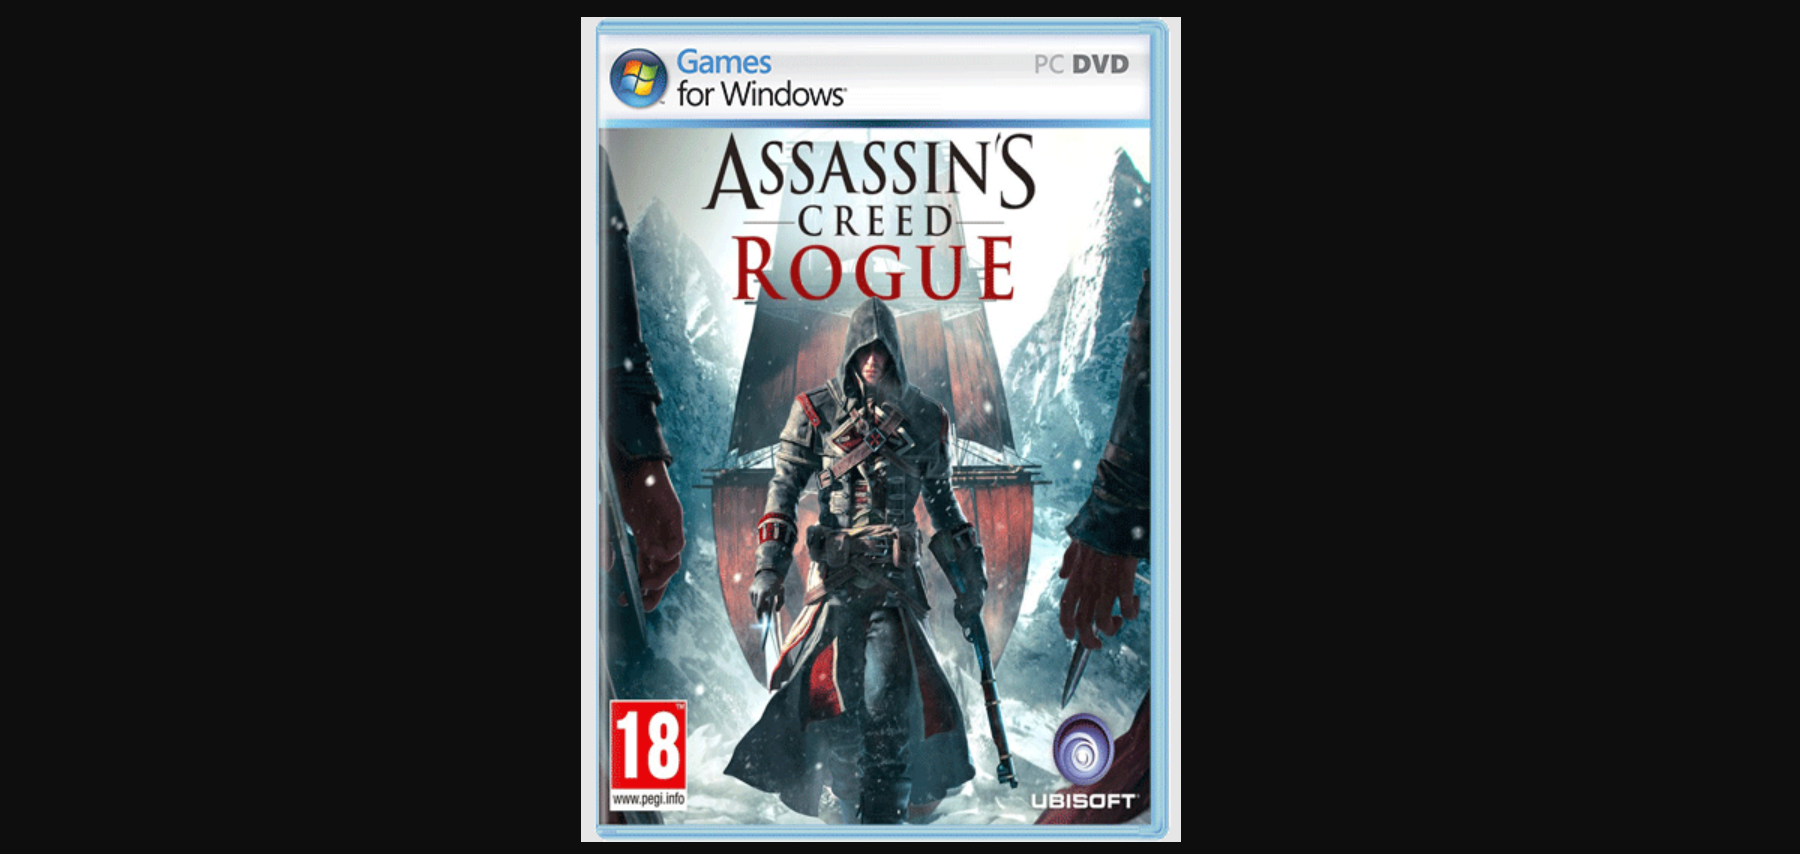 Assassins Creed Rogue PC game